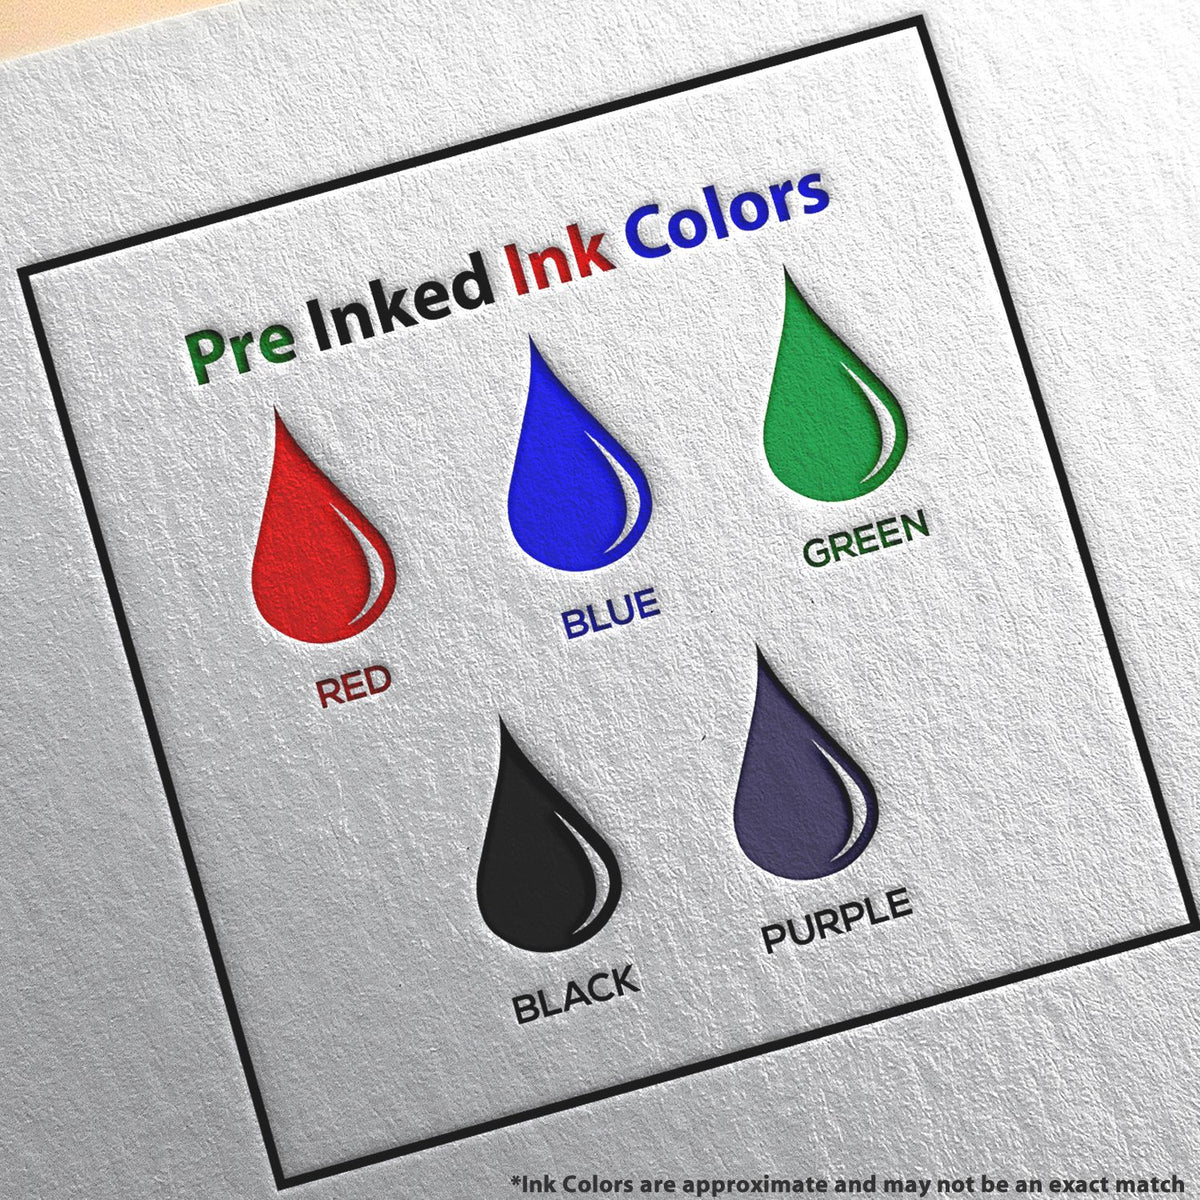 A picture showing the different ink colors or hues available for the PSI Colorado Notary Stamp product.